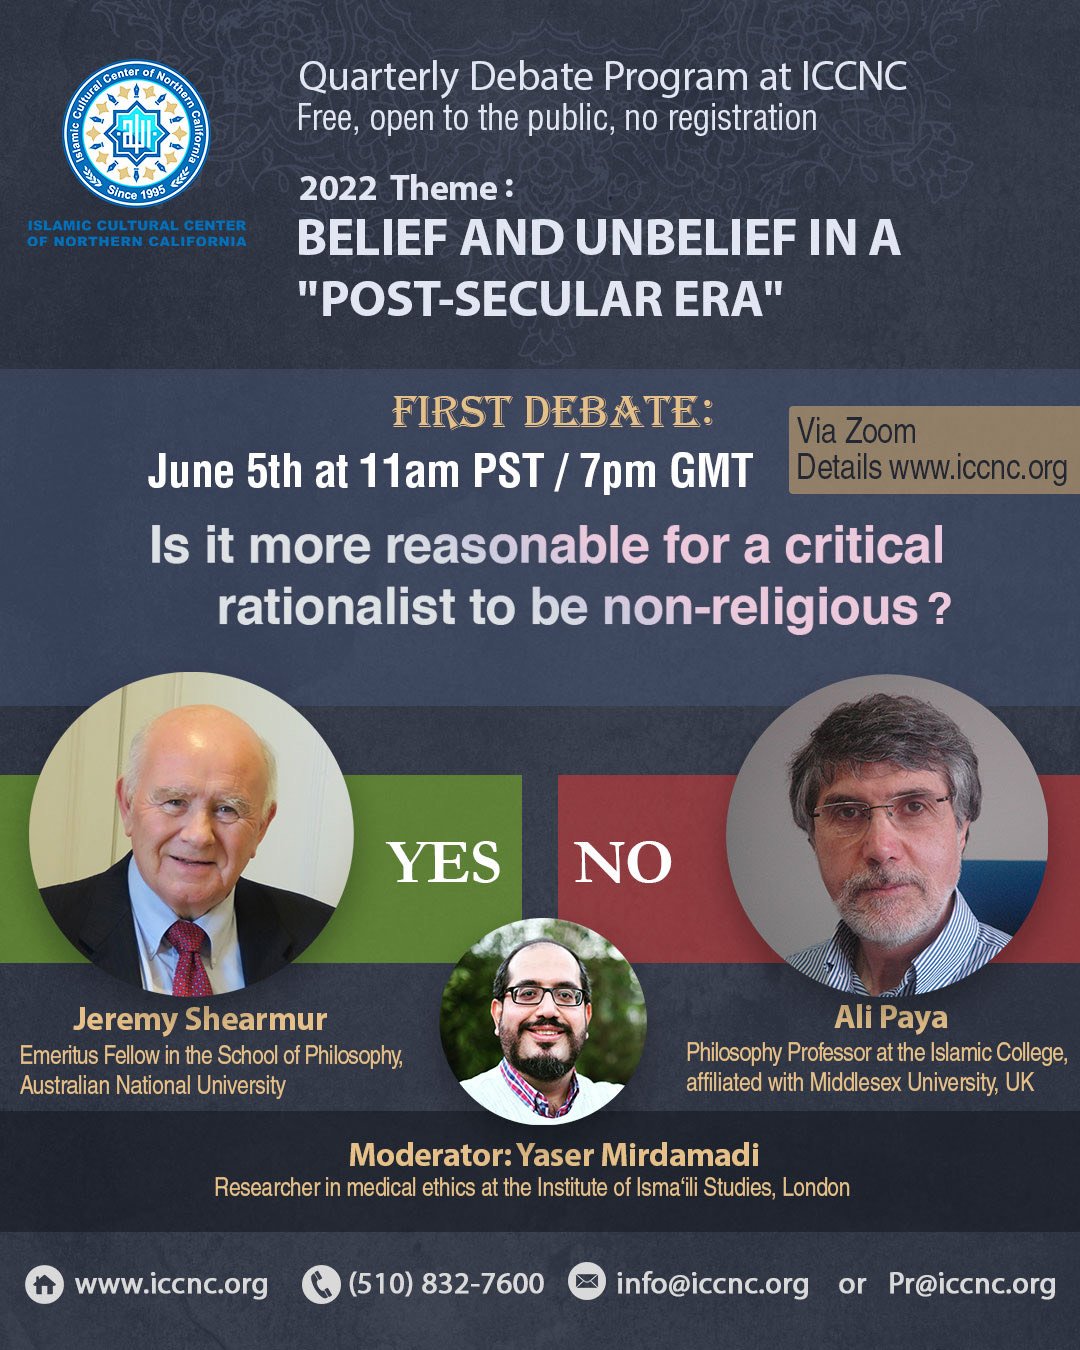 First Quarterly Debate on Belief and Unbelief: “Is it more reasonable for a critical rationalist to be a non-religious?”